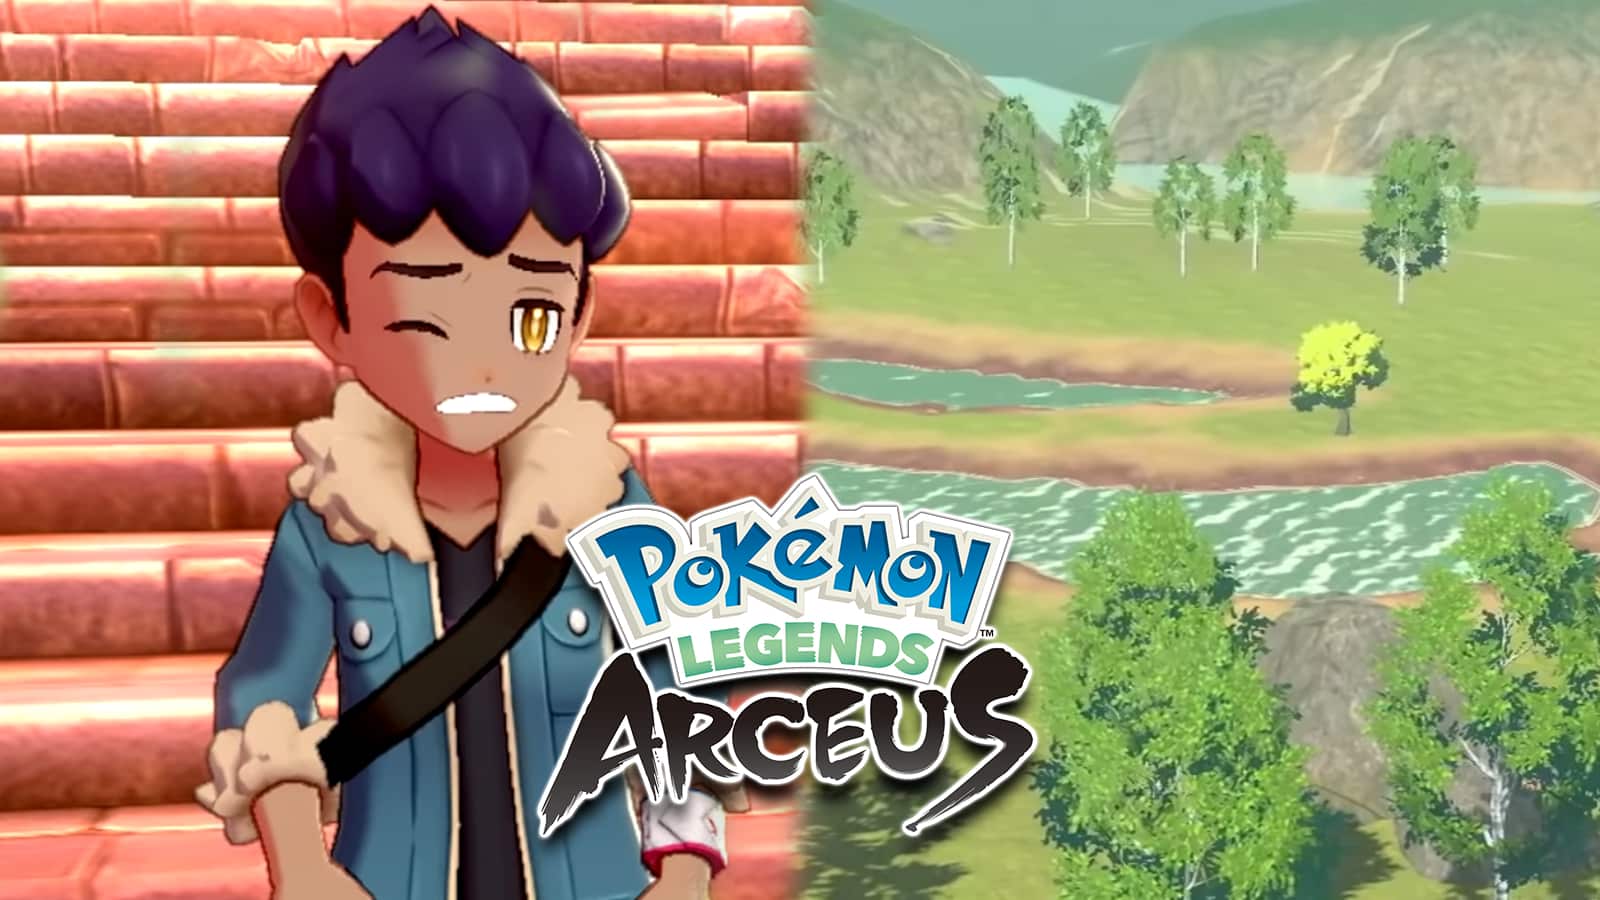 Pokemon Legends: Arceus Is Out Now, and $5 Off - IGN